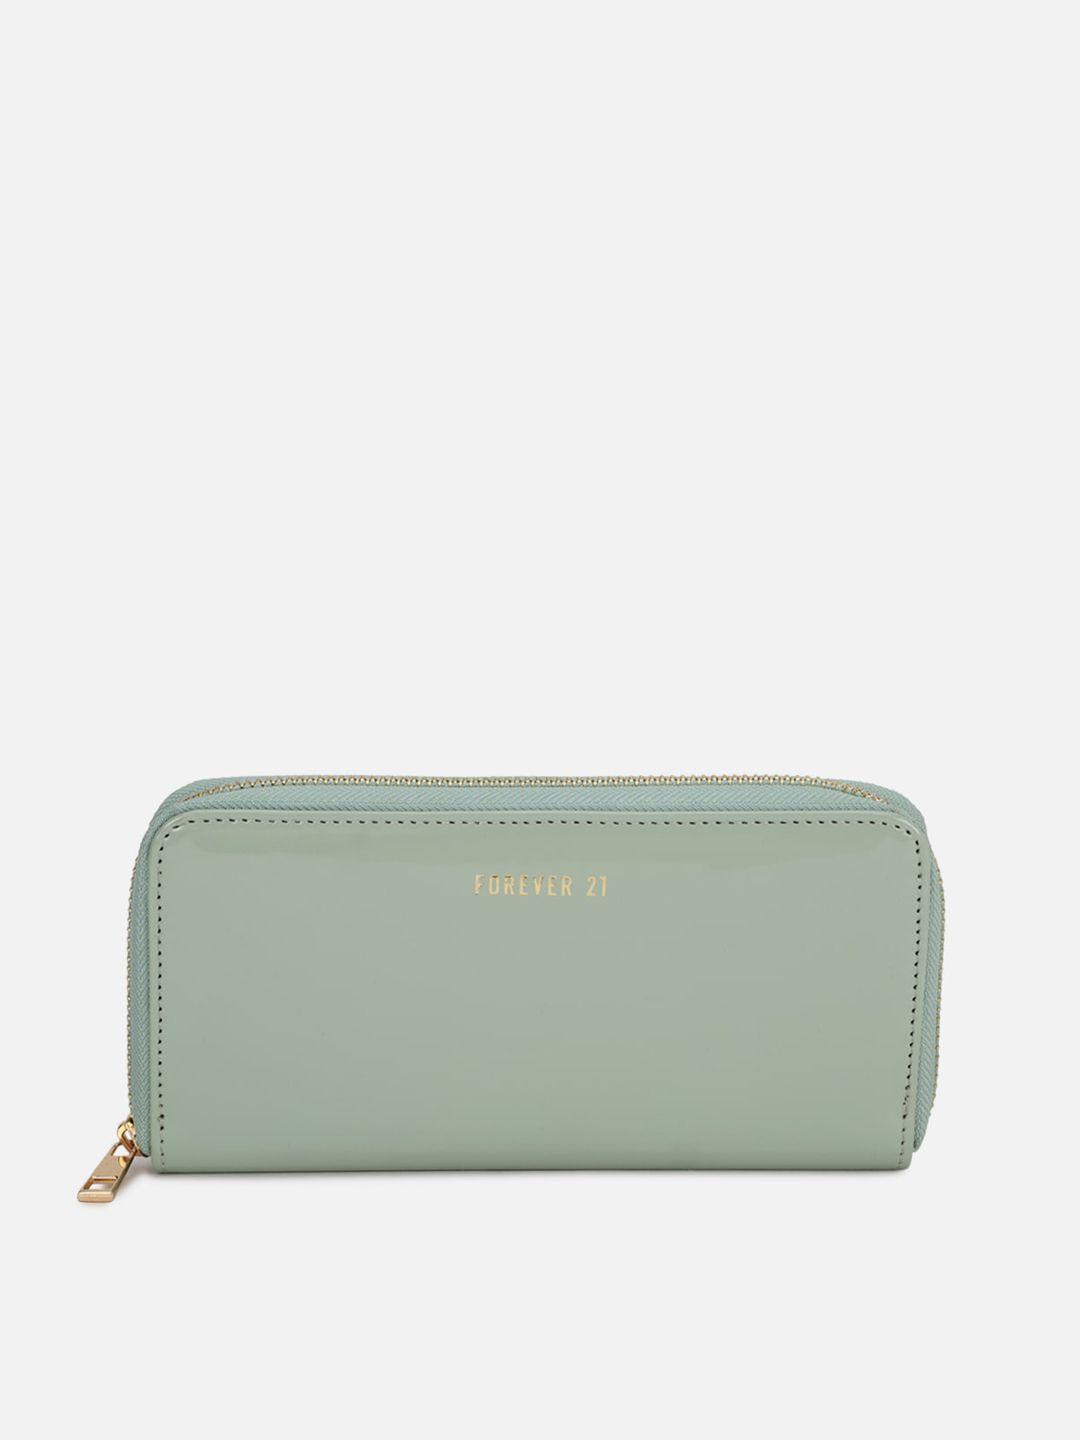 forever-21-green-purse-clutch